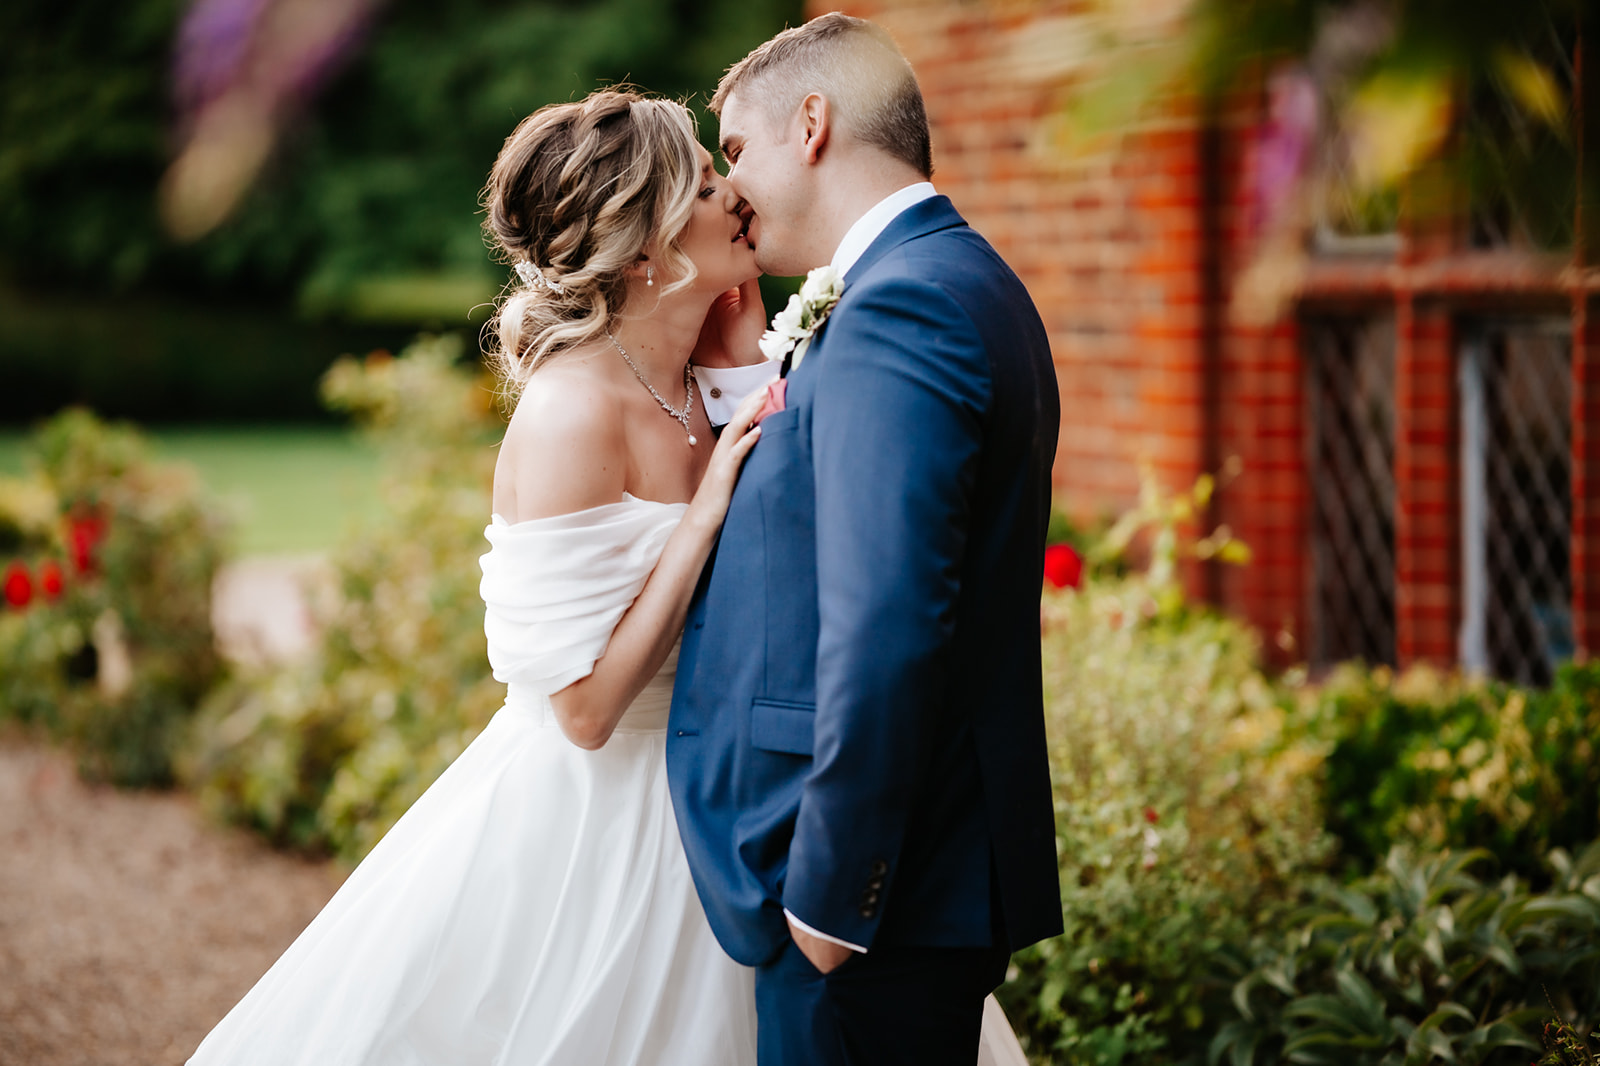 Couple share a kiss at their wedding, captured by lily and white wedding photography.